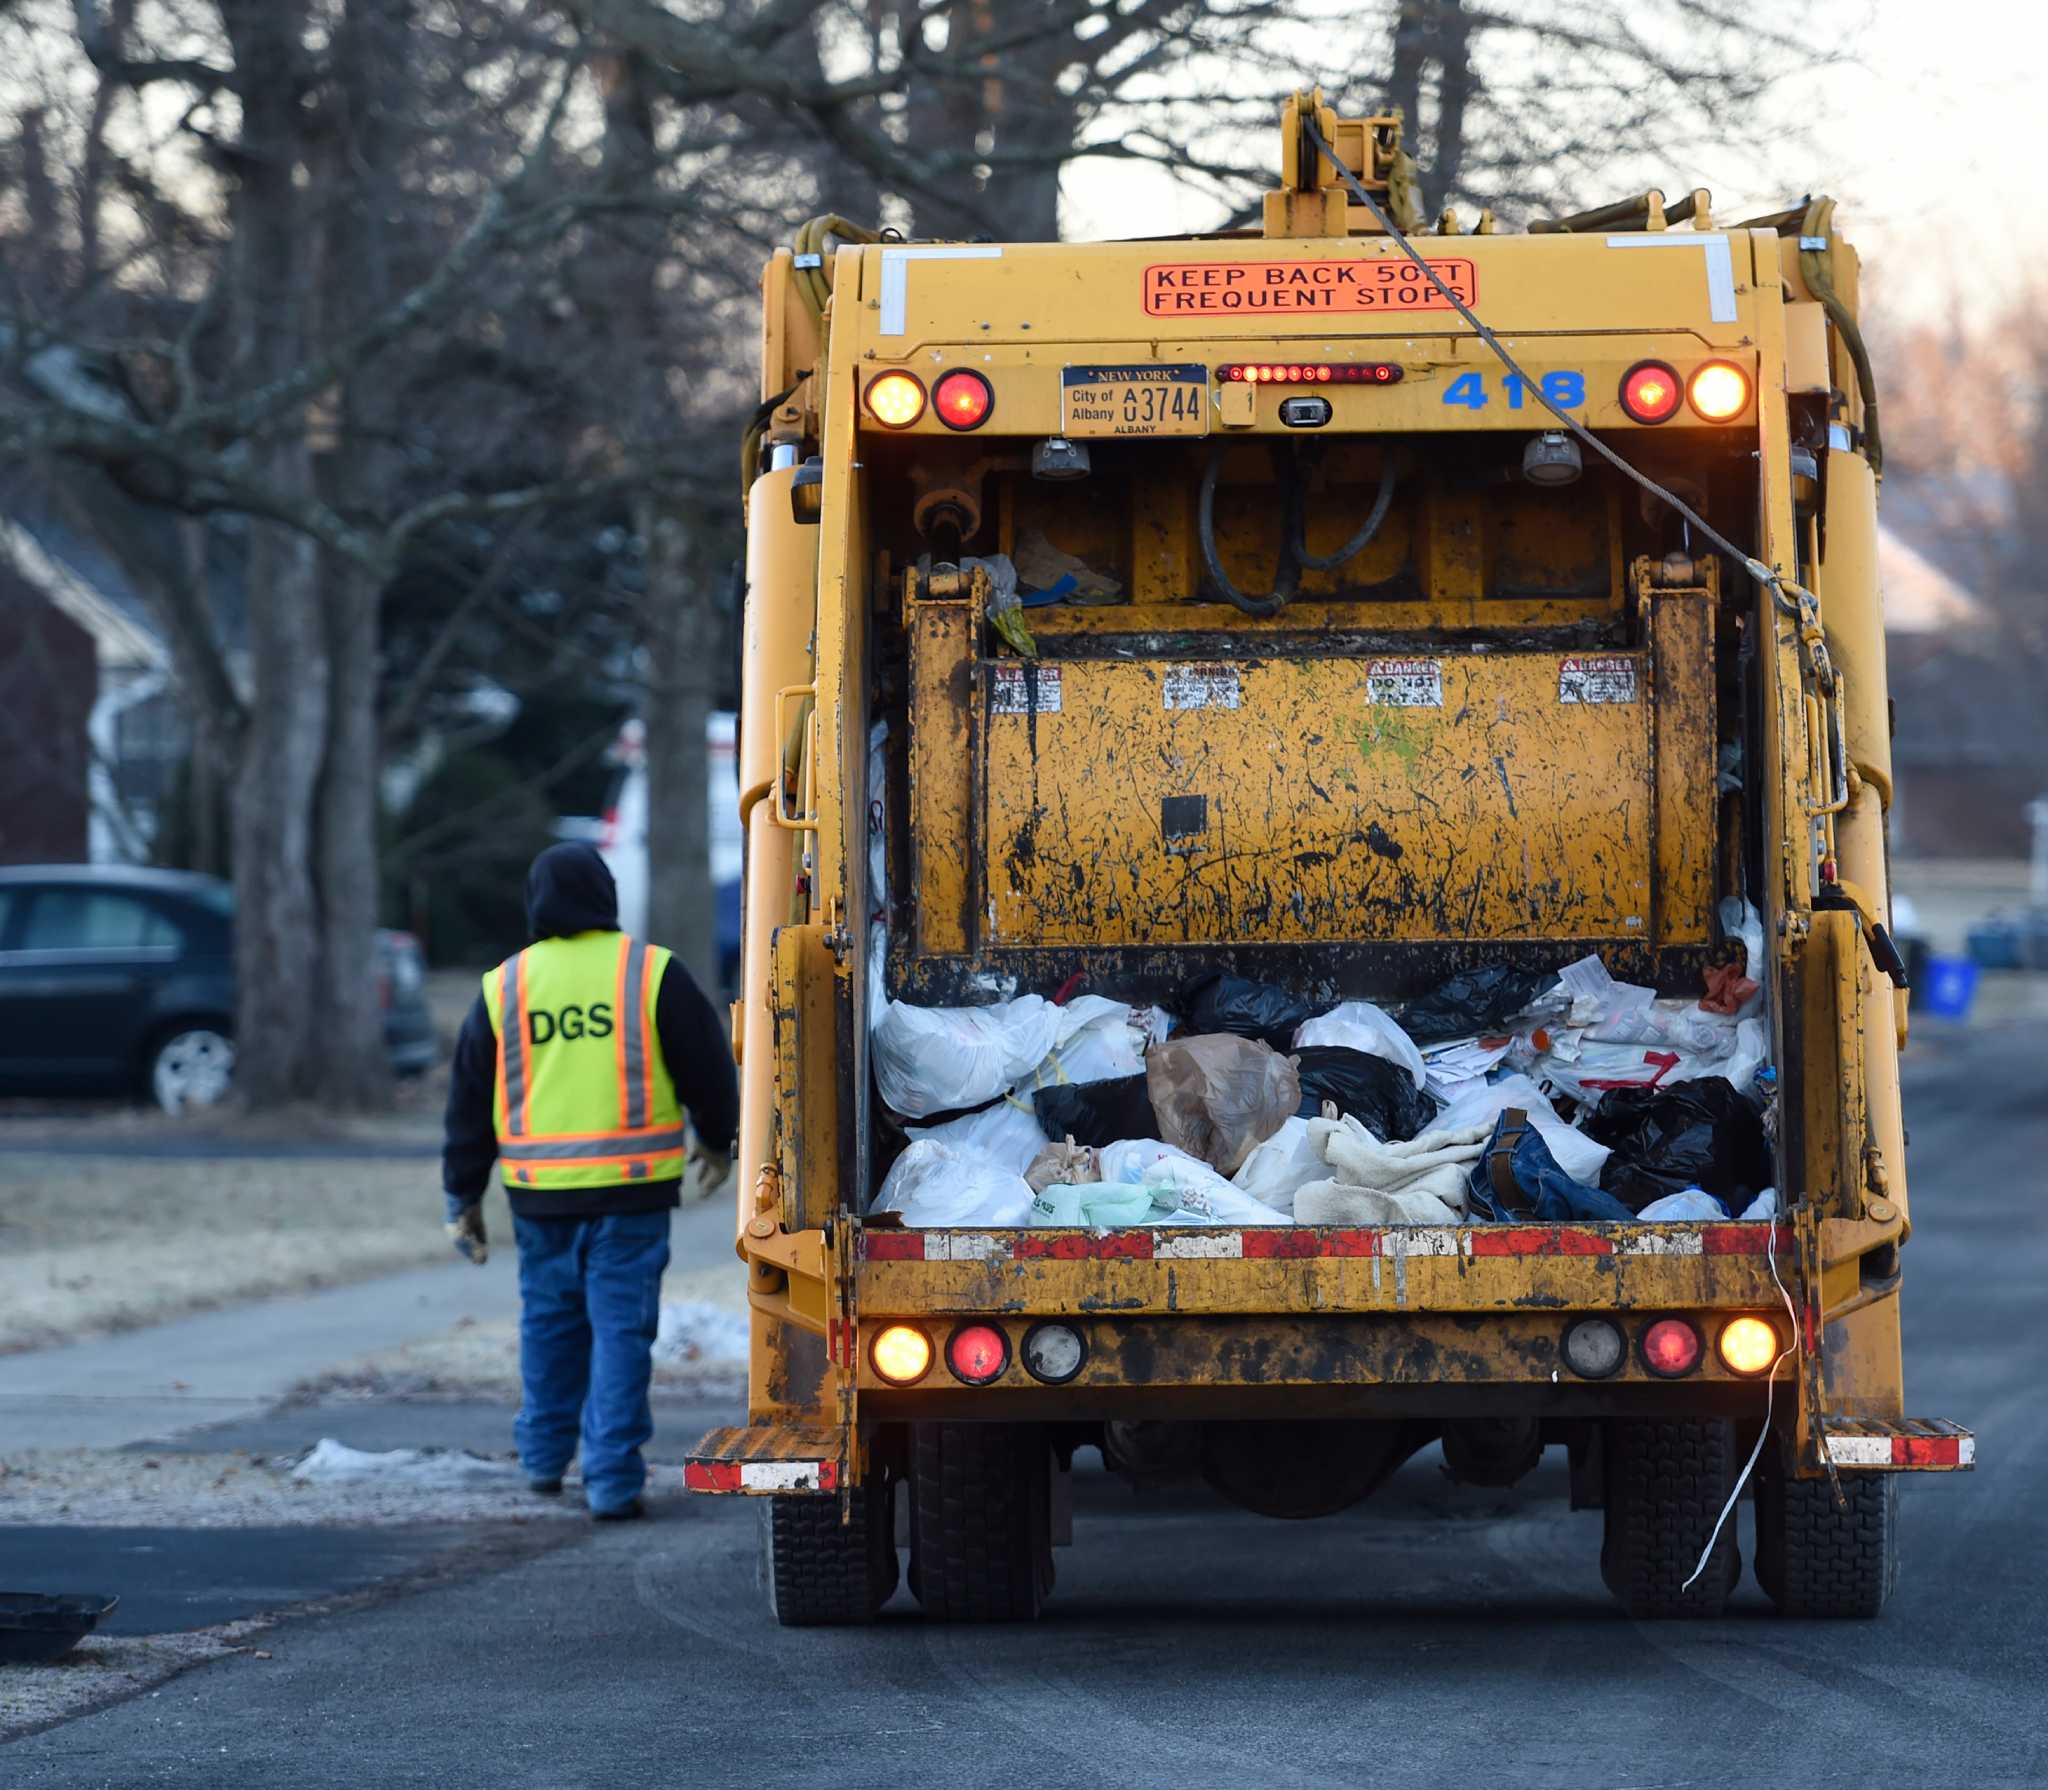 Albany Weighs Charging Residents For How Much They Throw Out